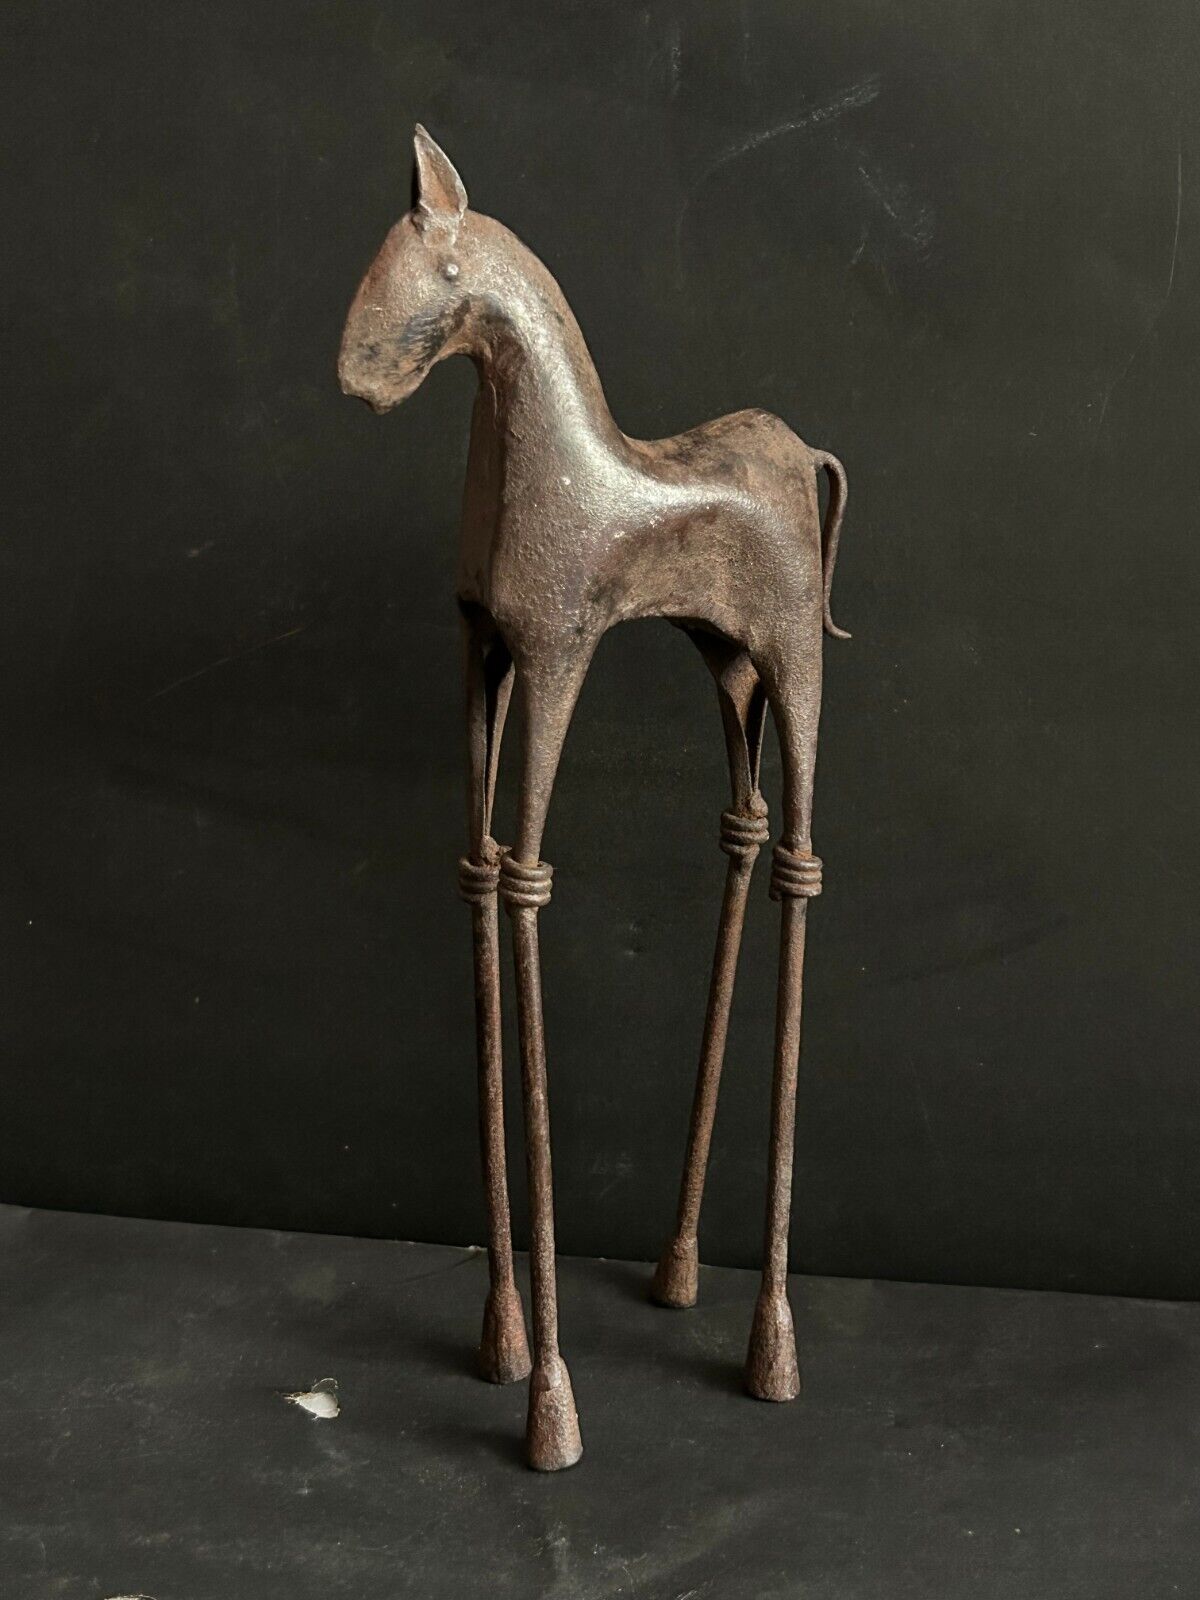 OLD VINTAGE HAND MADE RUSTIC IRON UNIQUE LONG LAG HORSE STATUE / SCULPTURE HOME